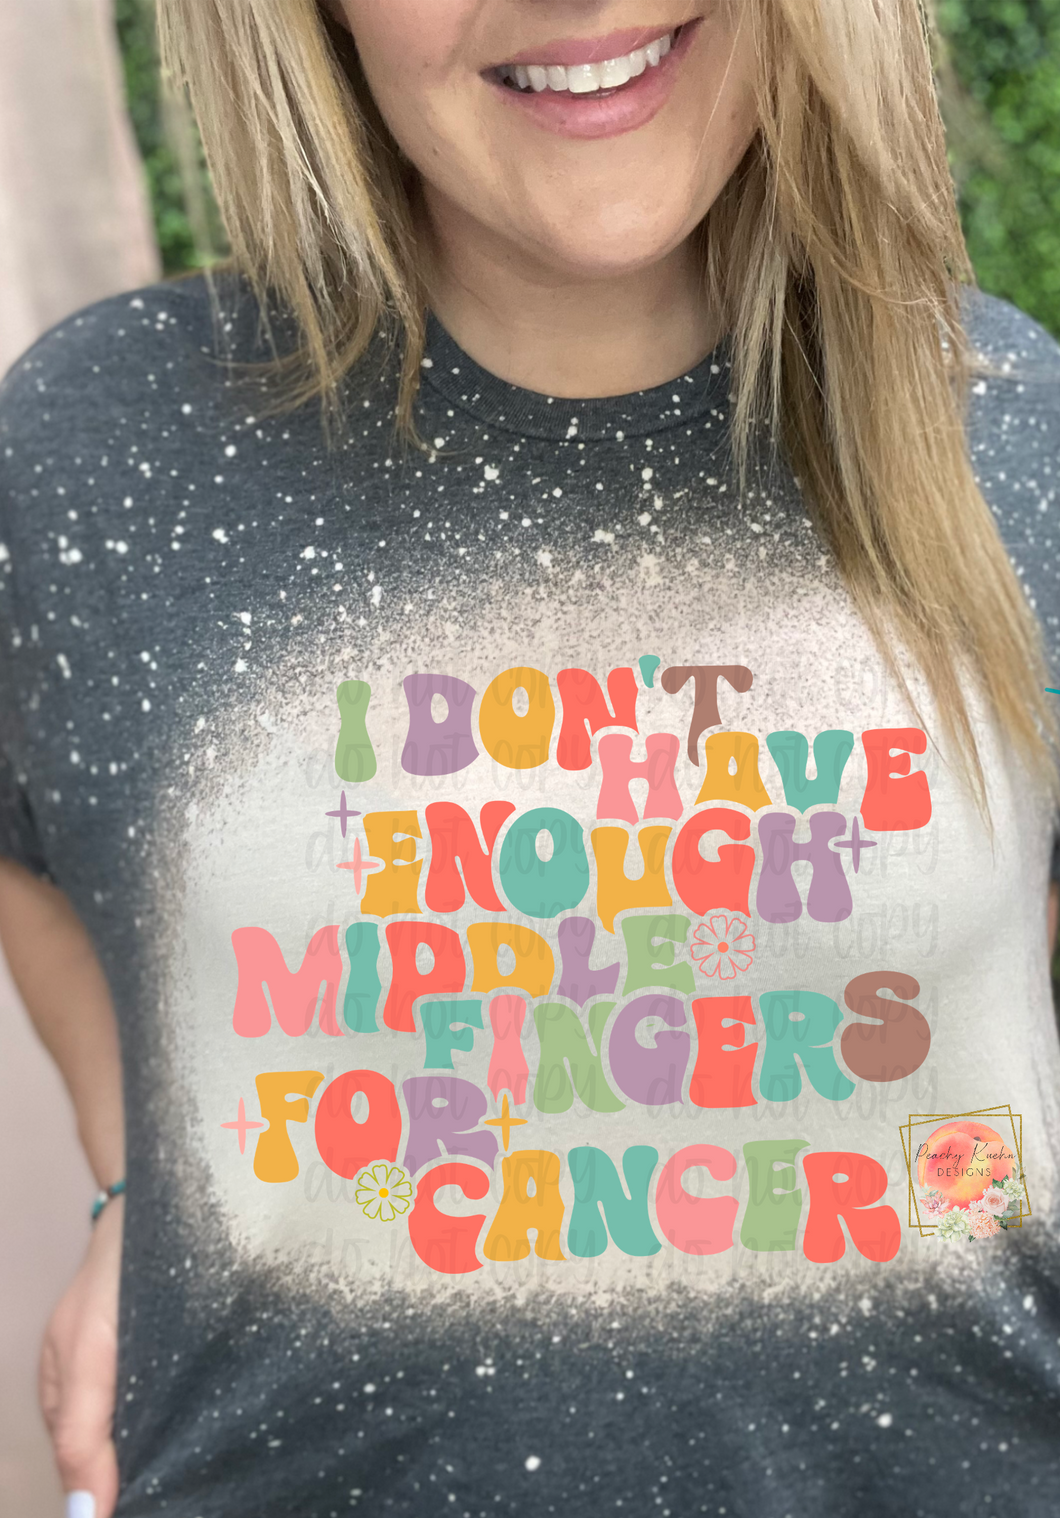 I don’t have enough middle fingers for cancer tee